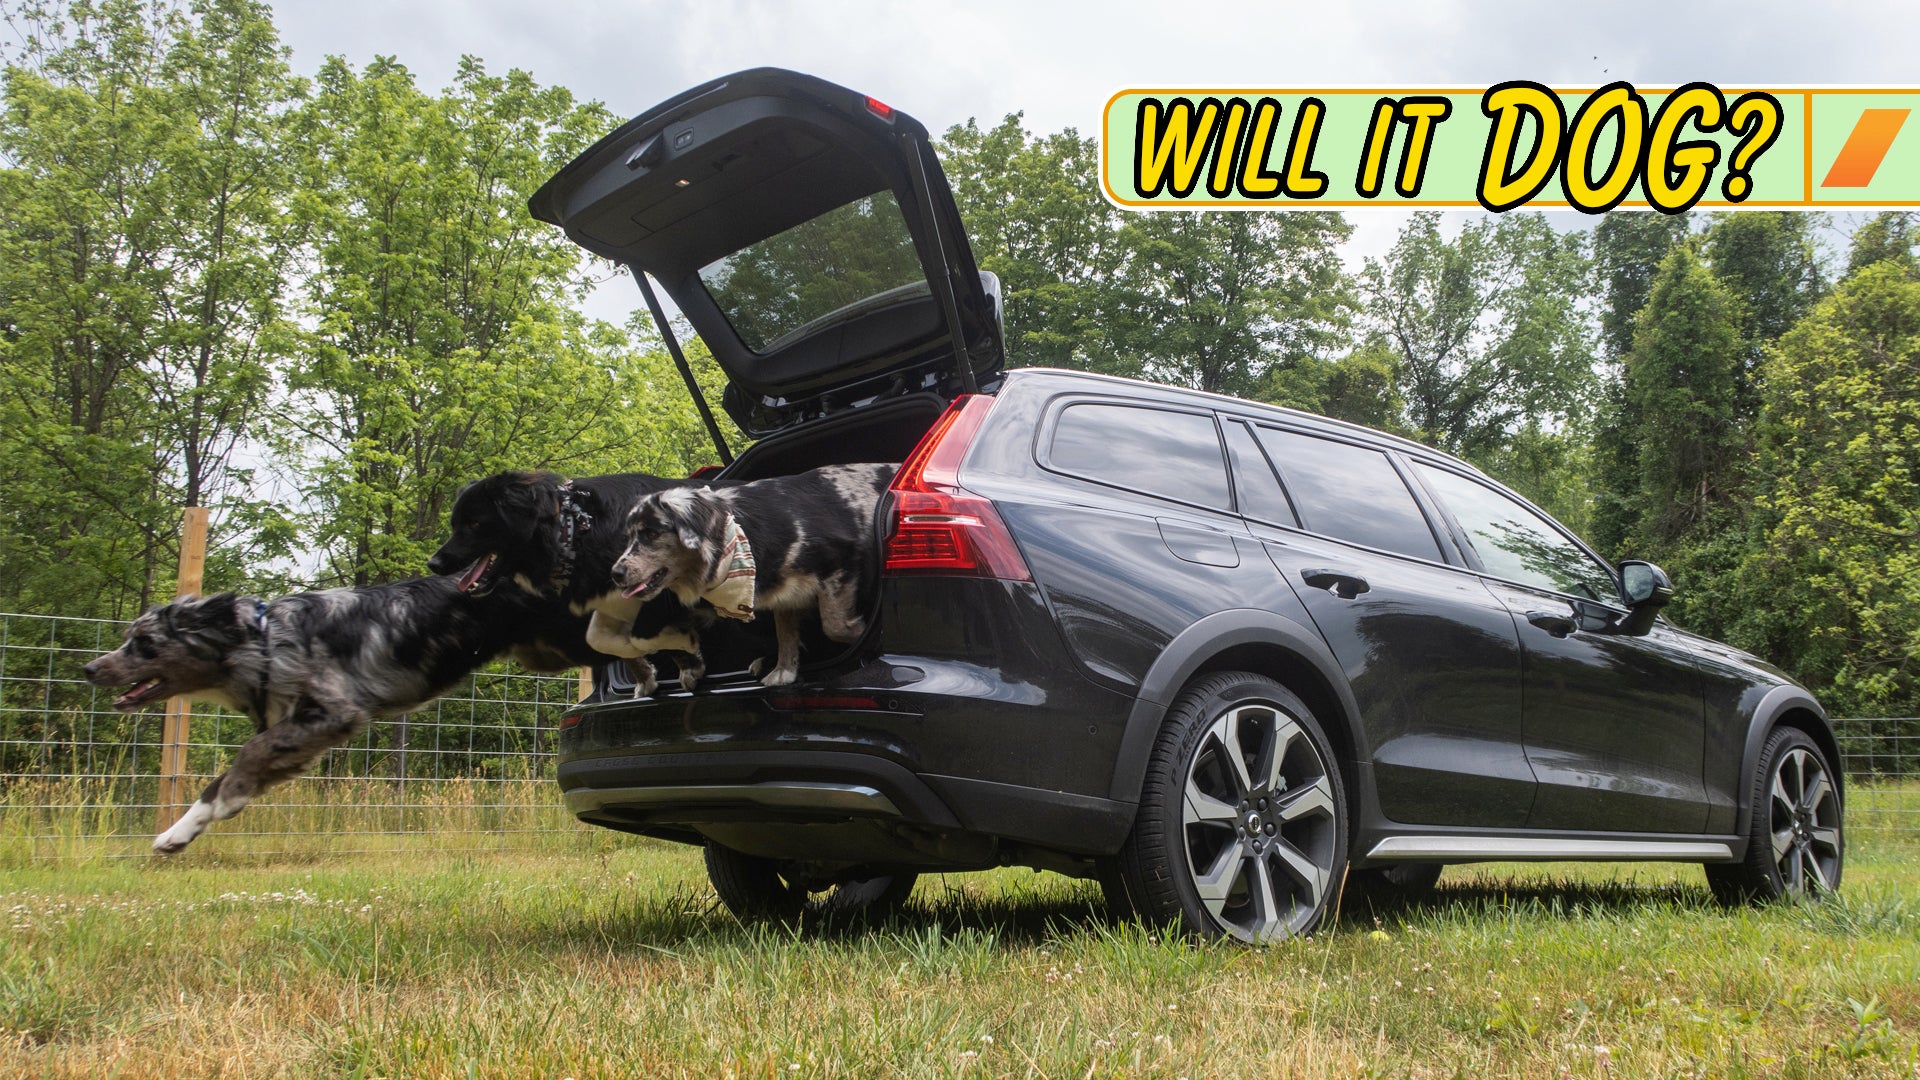 https://www.thedrive.com/uploads/2023/06/20/2023-Volvo-V60-CC-Good-For-Dogs.jpg?auto=webp